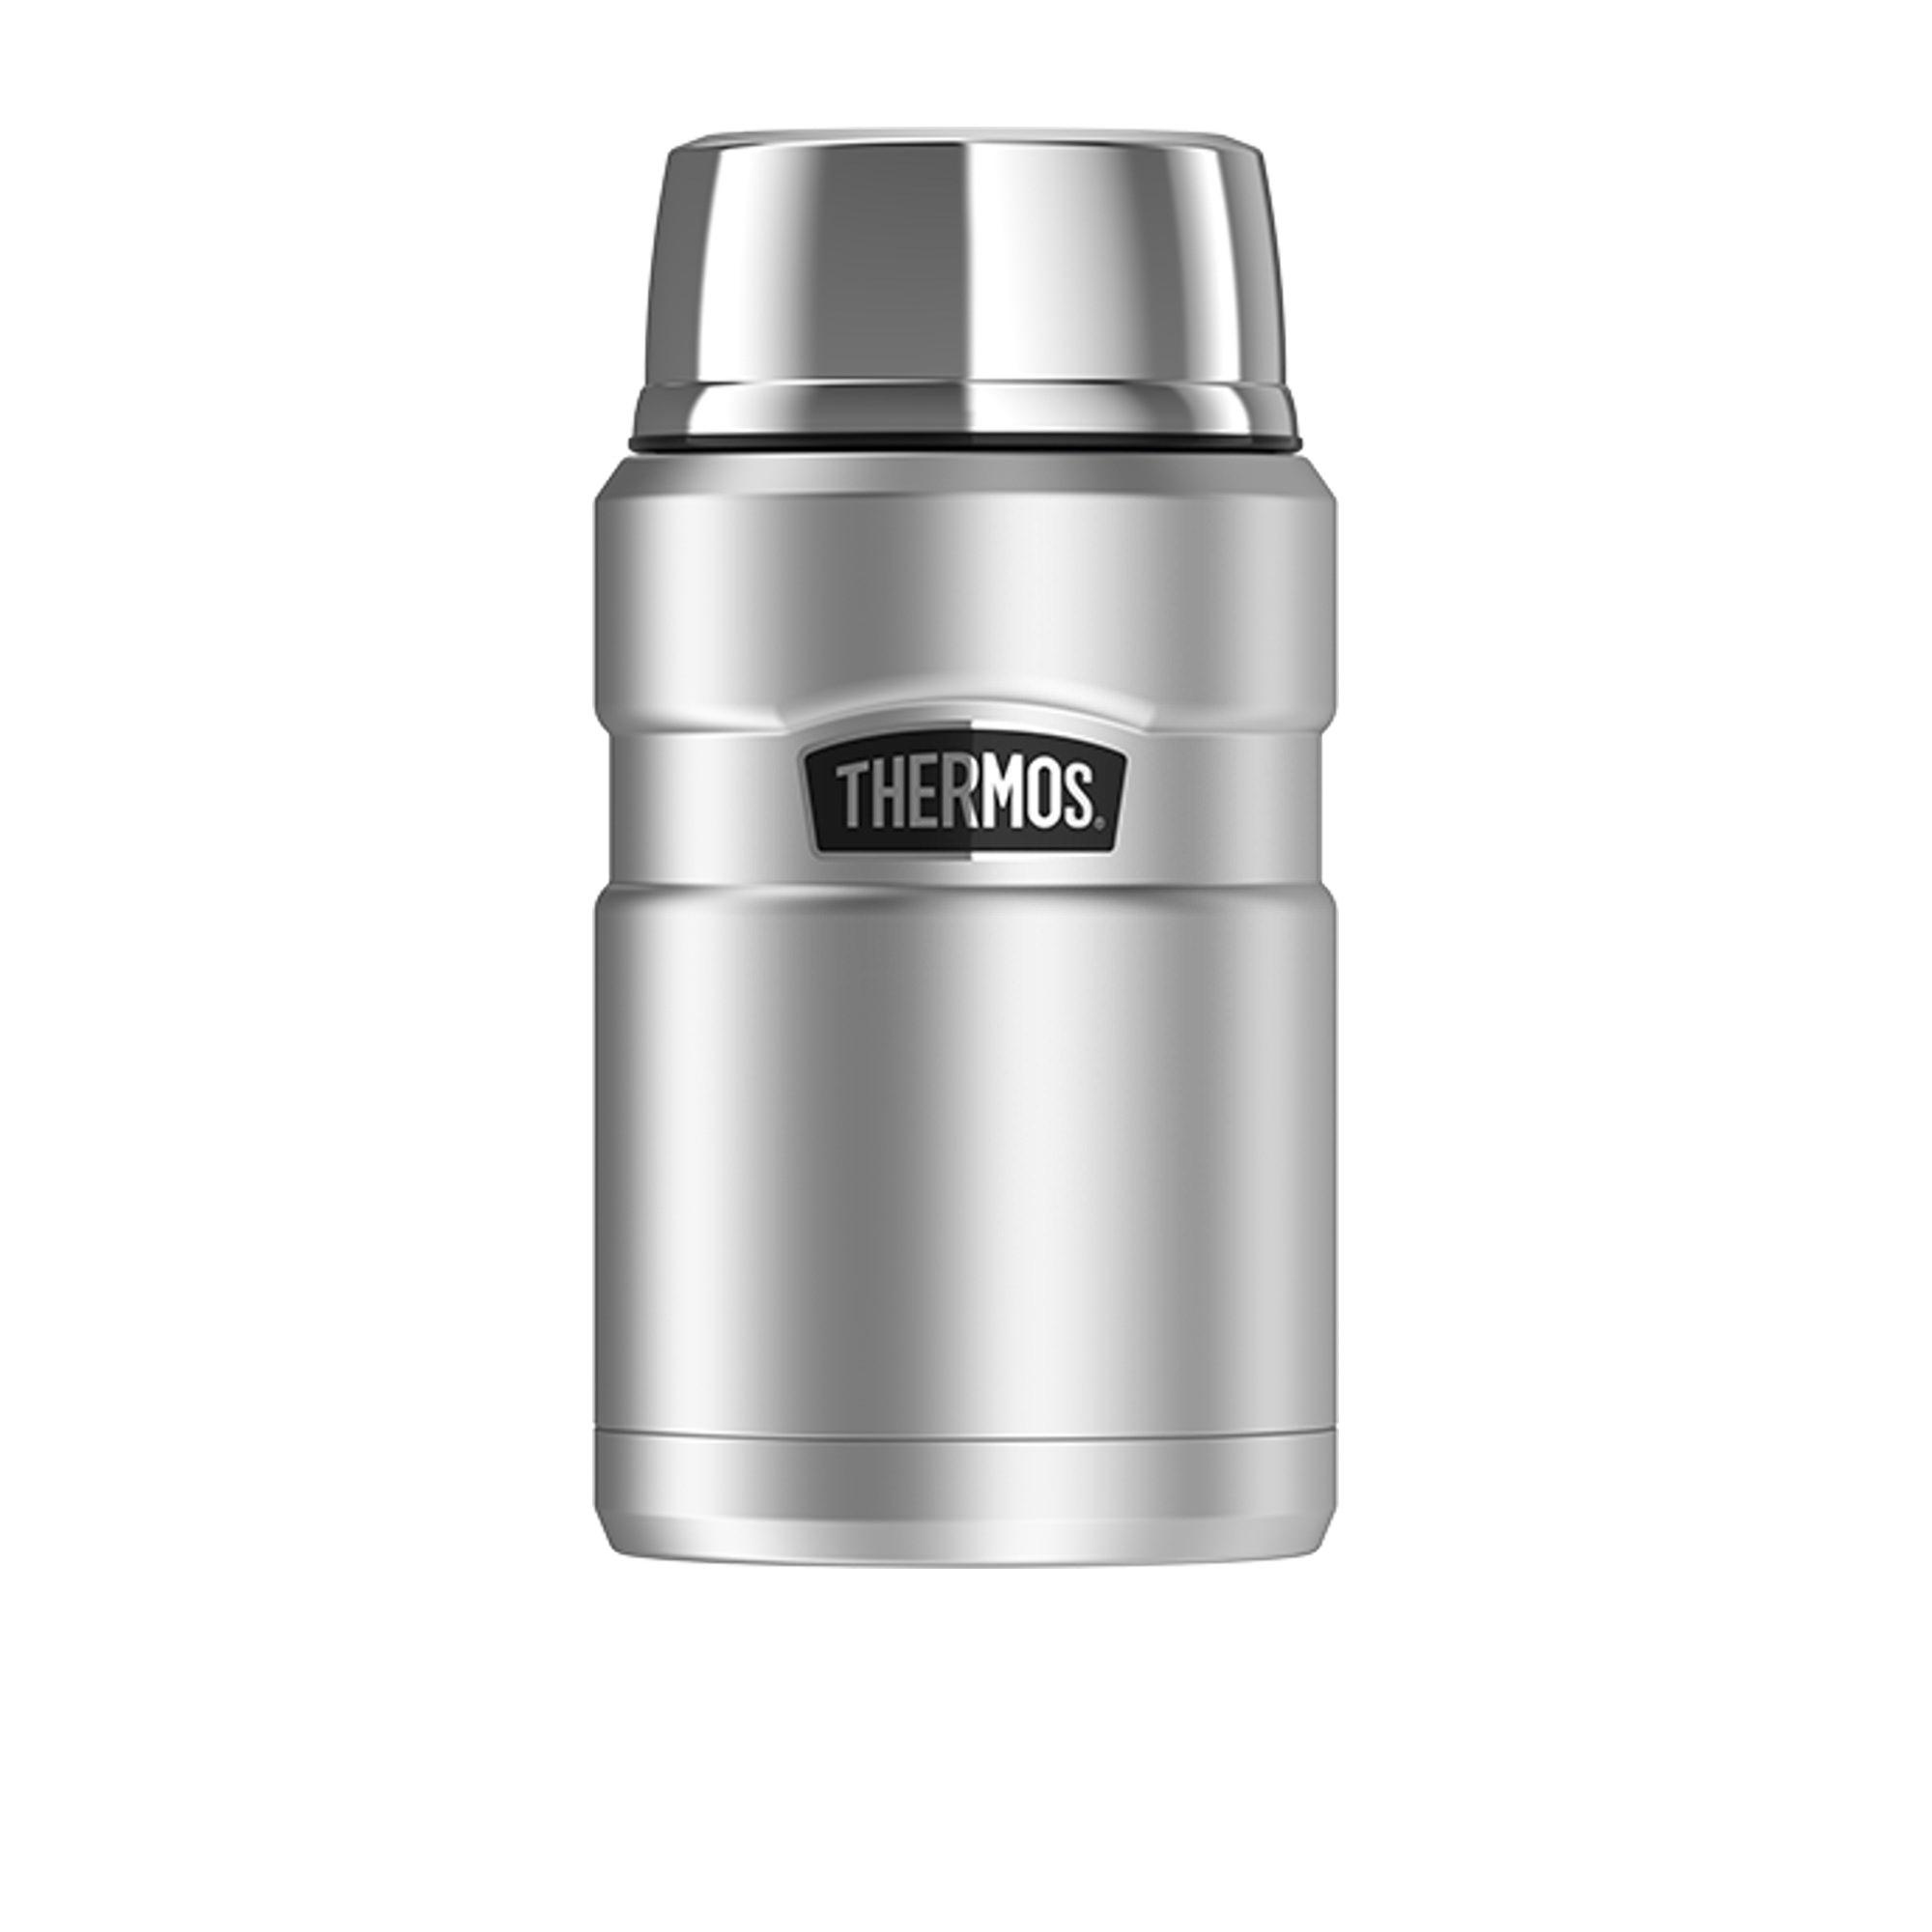 Thermos Stainless King Insulated Food Jar 710ml Stainless Steel Image 1